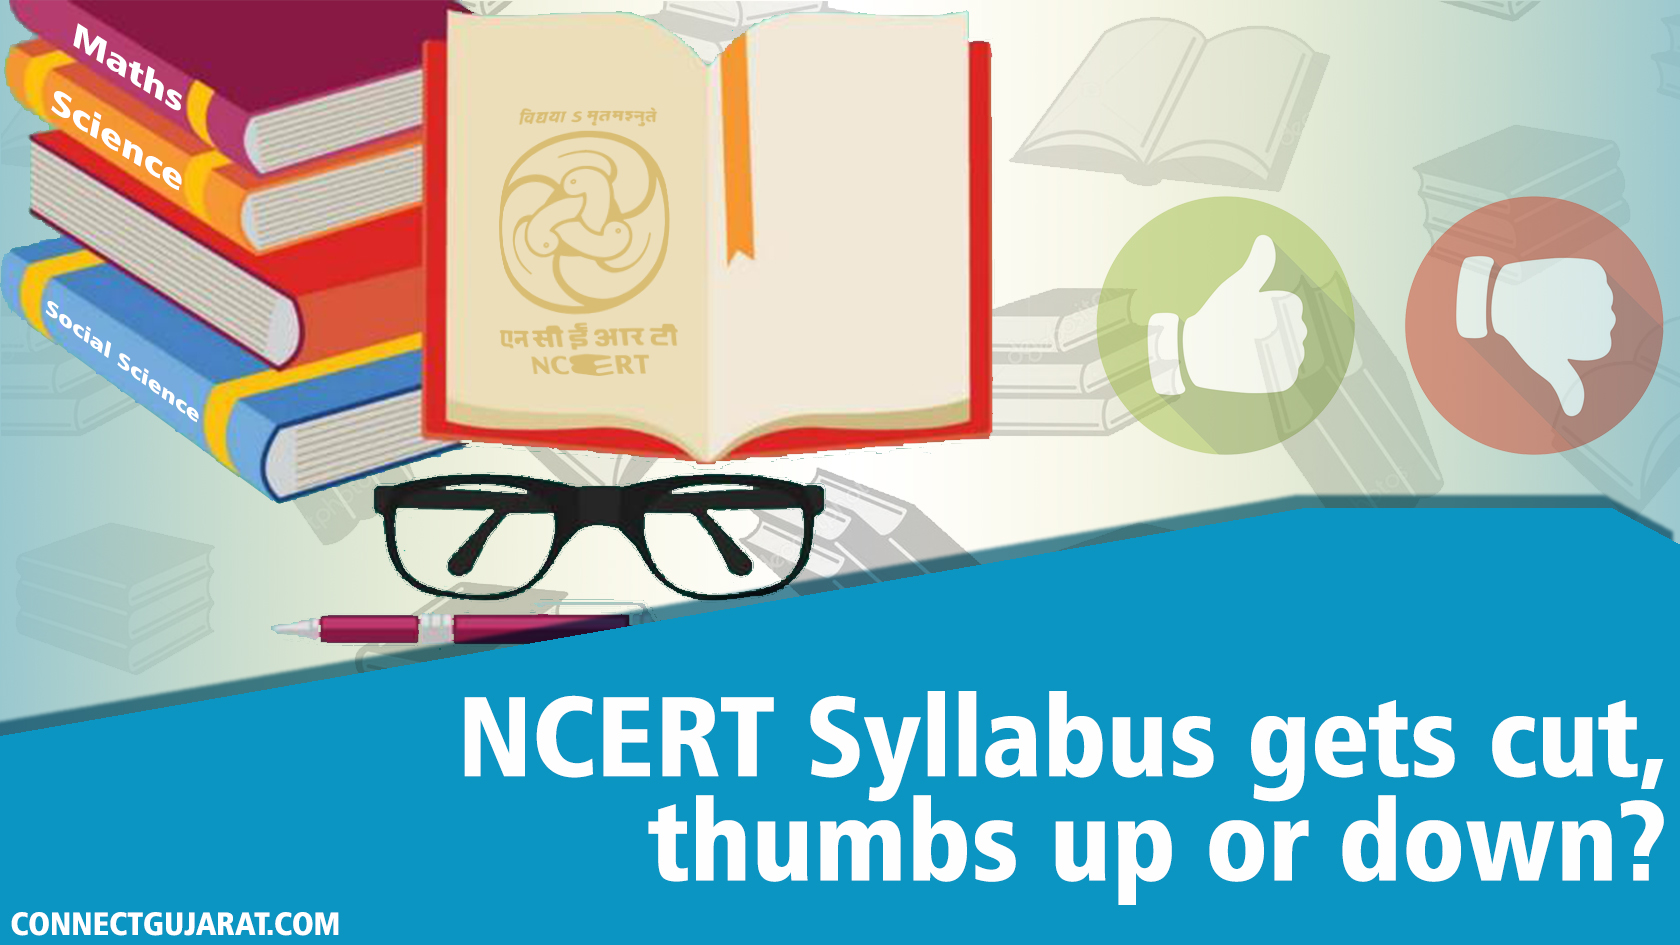 NCERT Syllabus gets cut, thumbs up or down